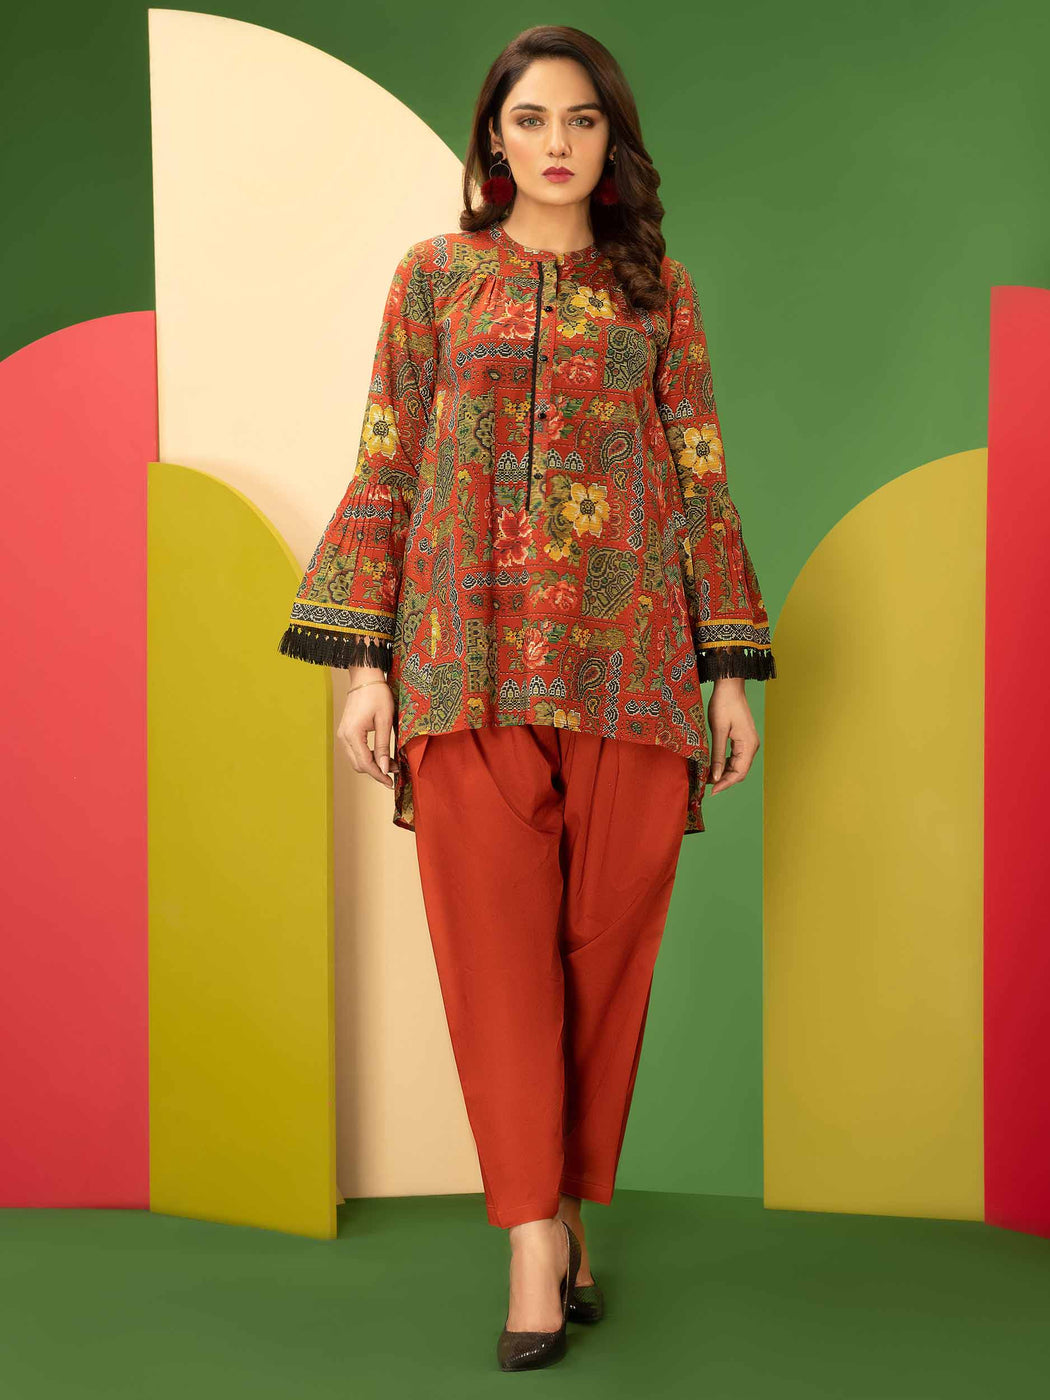 Buy Women S Unstitched Suits Online Shopping Pakistani Unstitched Fabric